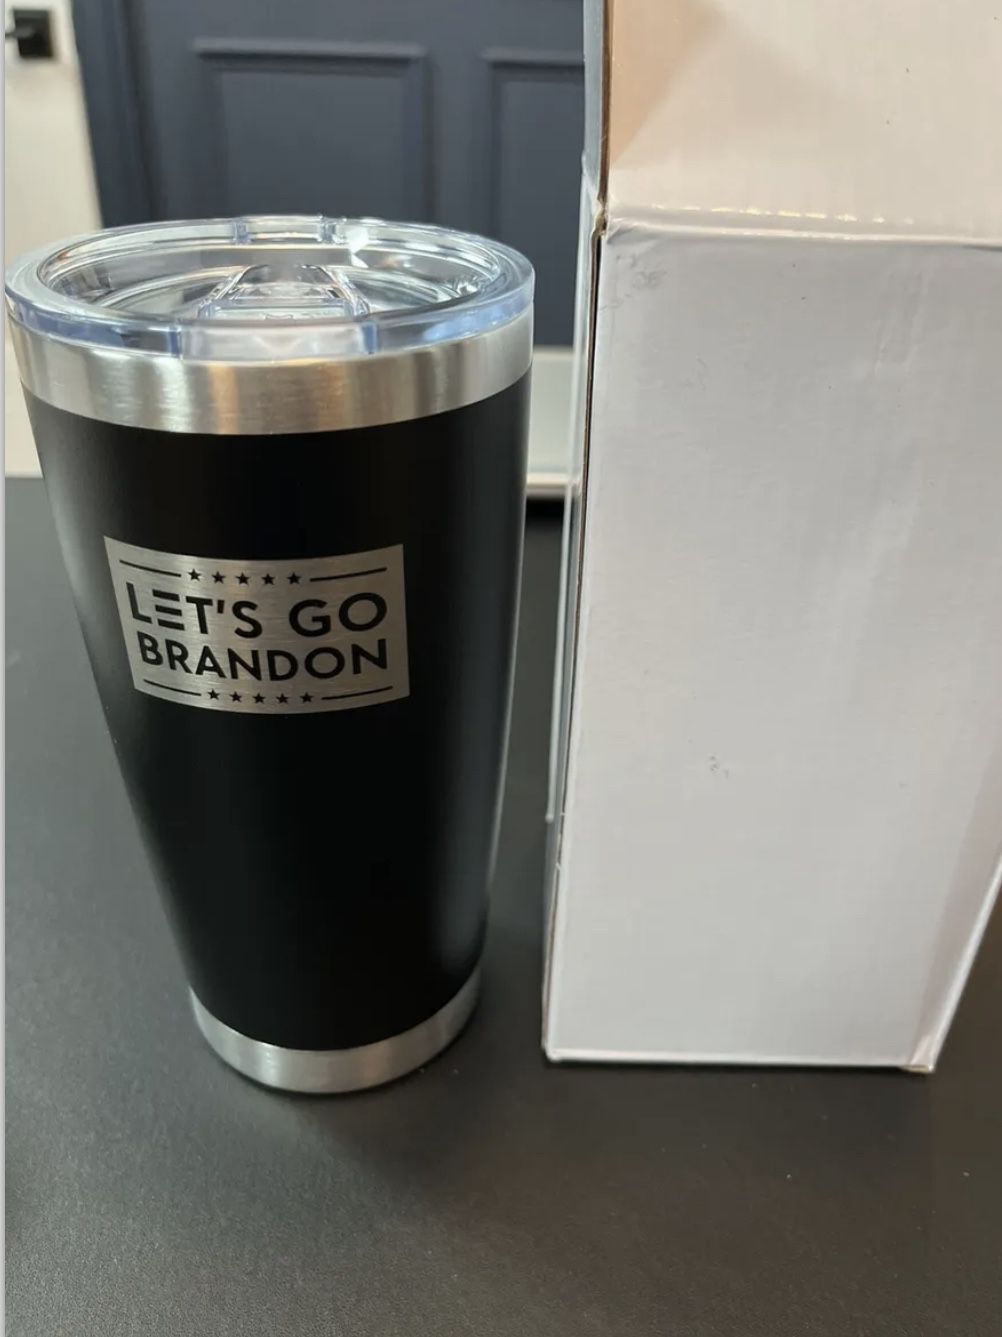 20 Total- Let’s Go Brandon 20oz Tumblers - $3.75 Each - Price For All 20